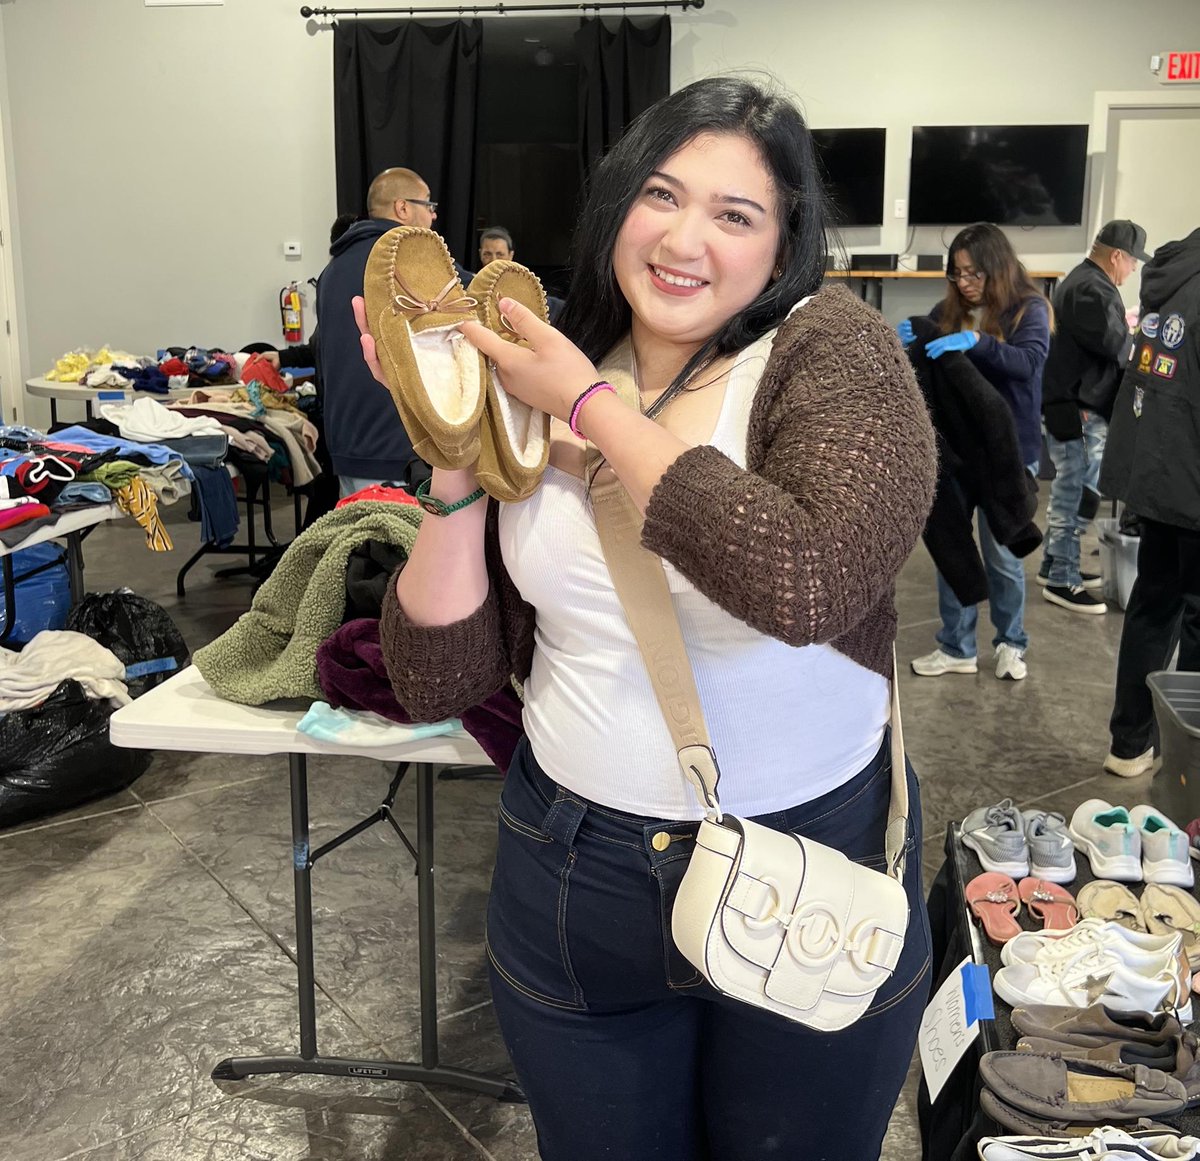 Rescue Mission Alliance Central Coast Holds Clothing Distribution Event for DHS Students - On March 25, the Rescue Mission Alliance Central Coast (formerly Central Coast Rescue Mission) kicked off their Easter Week of Hope with a clothi... smjuhsd.org/sys/content/ne…